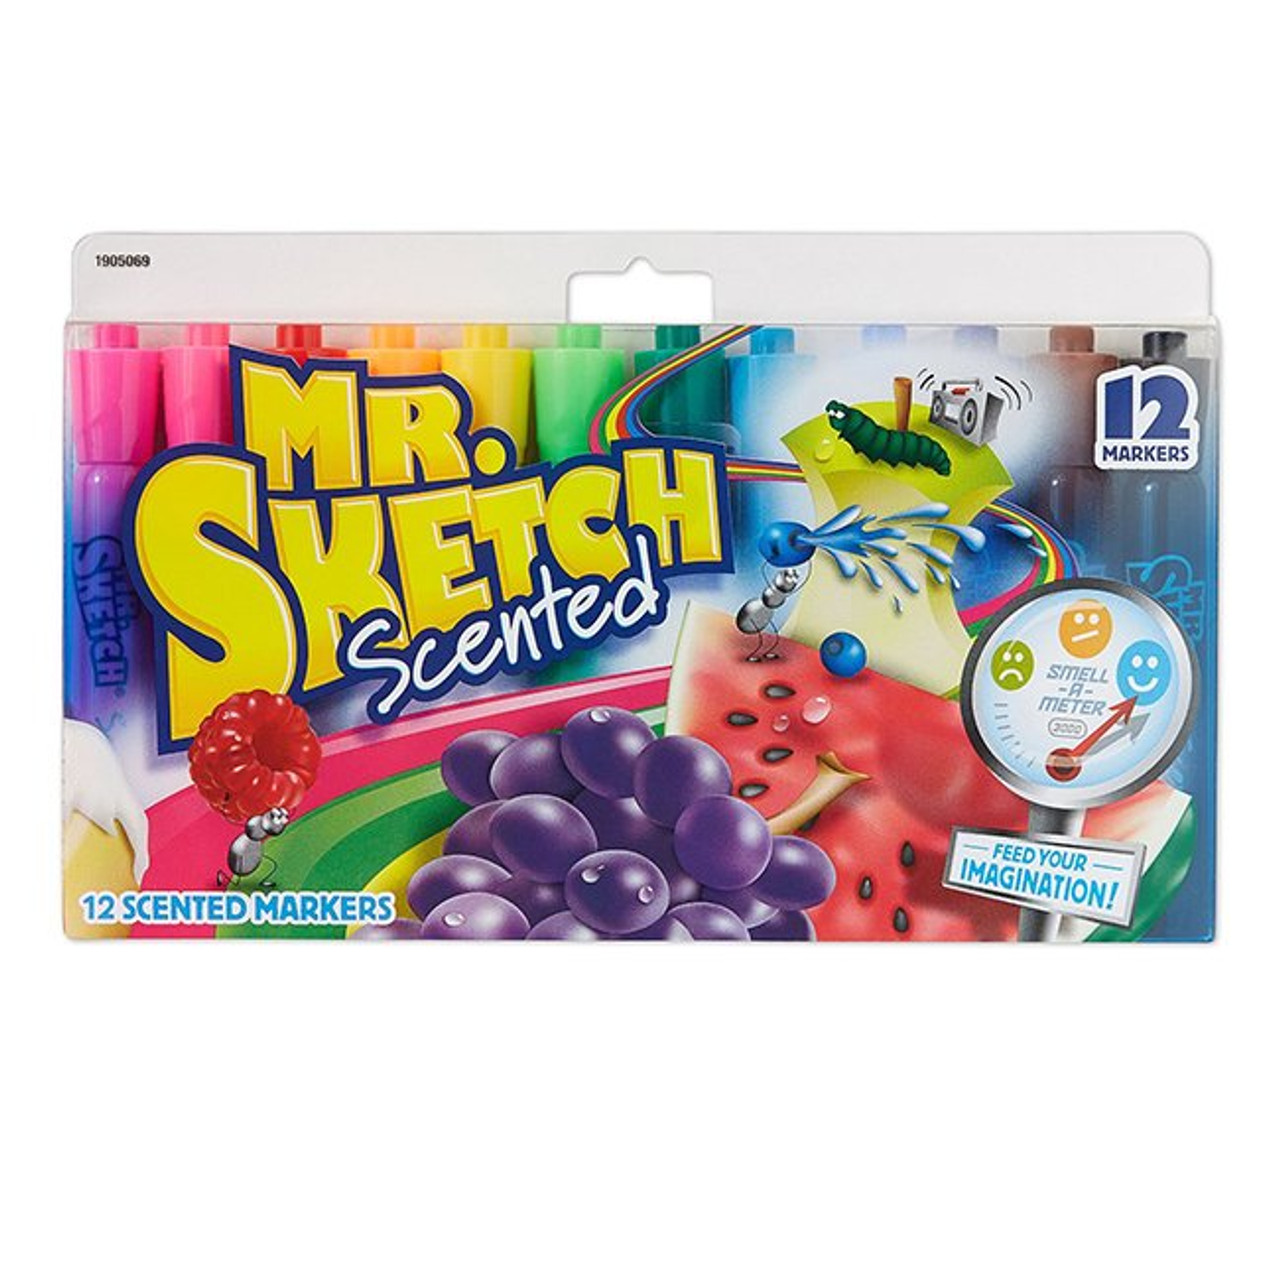 https://cdn11.bigcommerce.com/s-hk3ilm7bo7/images/stencil/1280x1280/products/15864/7774/mr-sketch-scented-watercolor-markers-12-piece__04760.1579300451.jpg?c=2